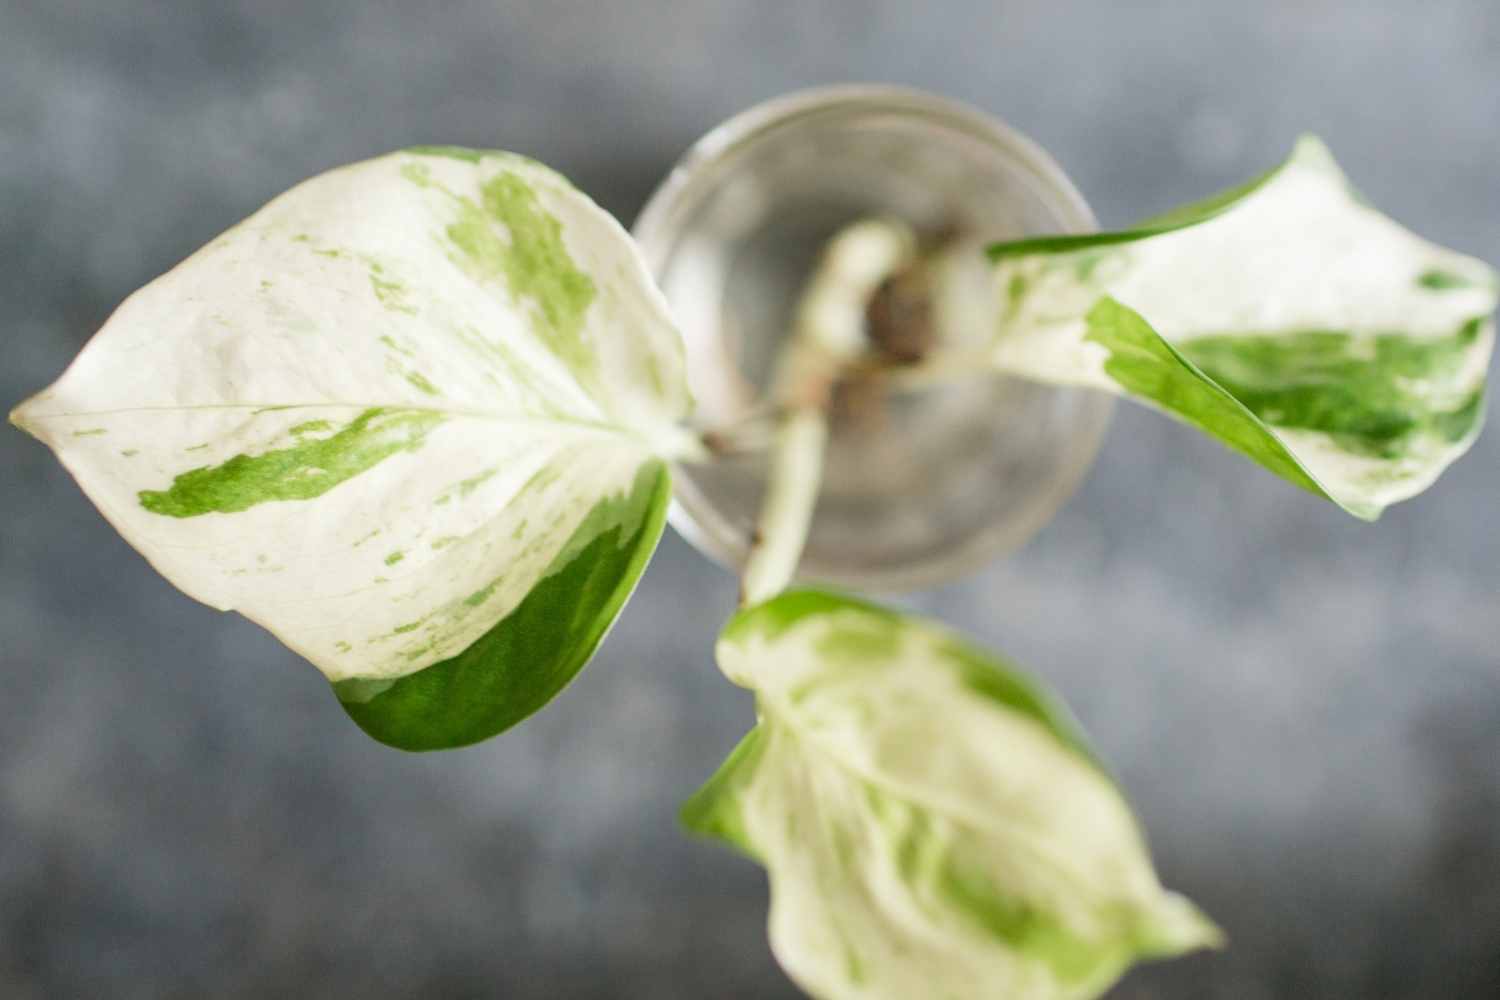 Pearls and Jade Pothos propagating a stem cutting